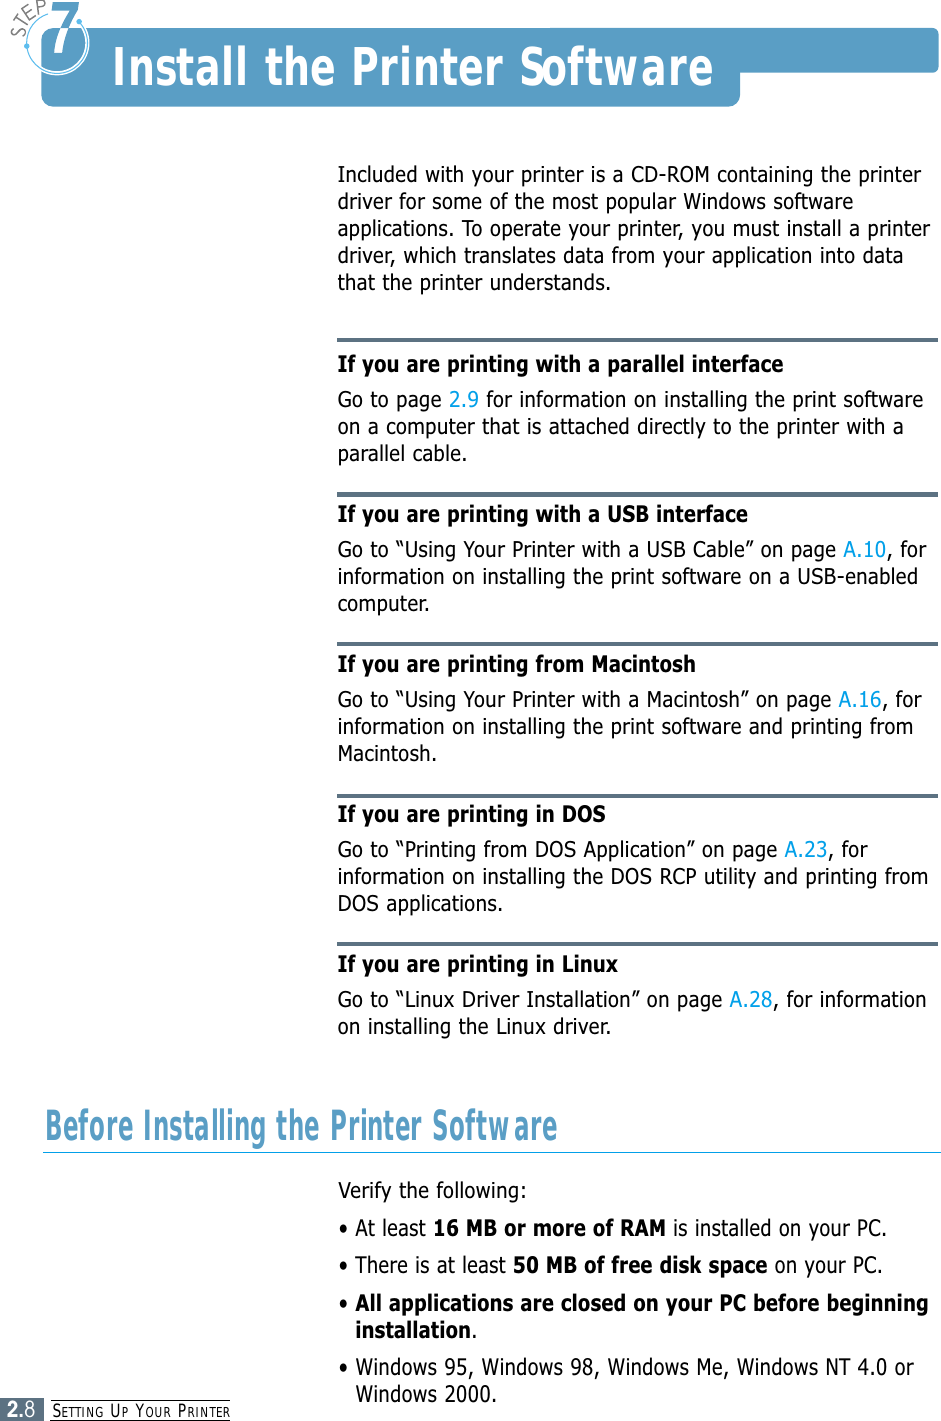 SETTING UPYOUR PRINTER2.8Included with your printer is a CD-ROM containing the printerdriver for some of the most popular Windows softwareapplications. To operate your printer, you must install a printerdriver, which translates data from your application into datathat the printer understands.If you are printing with a parallel interfaceGo to page 2.9 for information on installing the print softwareon a computer that is attached directly to the printer with aparallel cable.If you are printing with a USB interfaceGo to “Using Your Printer with a USB Cable” on page A.10, forinformation on installing the print software on a USB-enabledcomputer.If you are printing from MacintoshGo to “Using Your Printer with a Macintosh” on page A.16, forinformation on installing the print software and printing fromMacintosh.If you are printing in DOSGo to “Printing from DOS Application” on page A.23, forinformation on installing the DOS RCP utility and printing fromDOS applications.If you are printing in LinuxGo to “Linux Driver Installation” on page A.28, for informationon installing the Linux driver.Install the Printer SoftwareVerify the following:• At least 16 MB or more of RAM is installed on your PC. • There is at least 50 MB of free disk space on your PC.• All applications are closed on your PC before beginninginstallation.• Windows 95, Windows 98, Windows Me, Windows NT 4.0 orWindows 2000.Before Installing the Printer Software